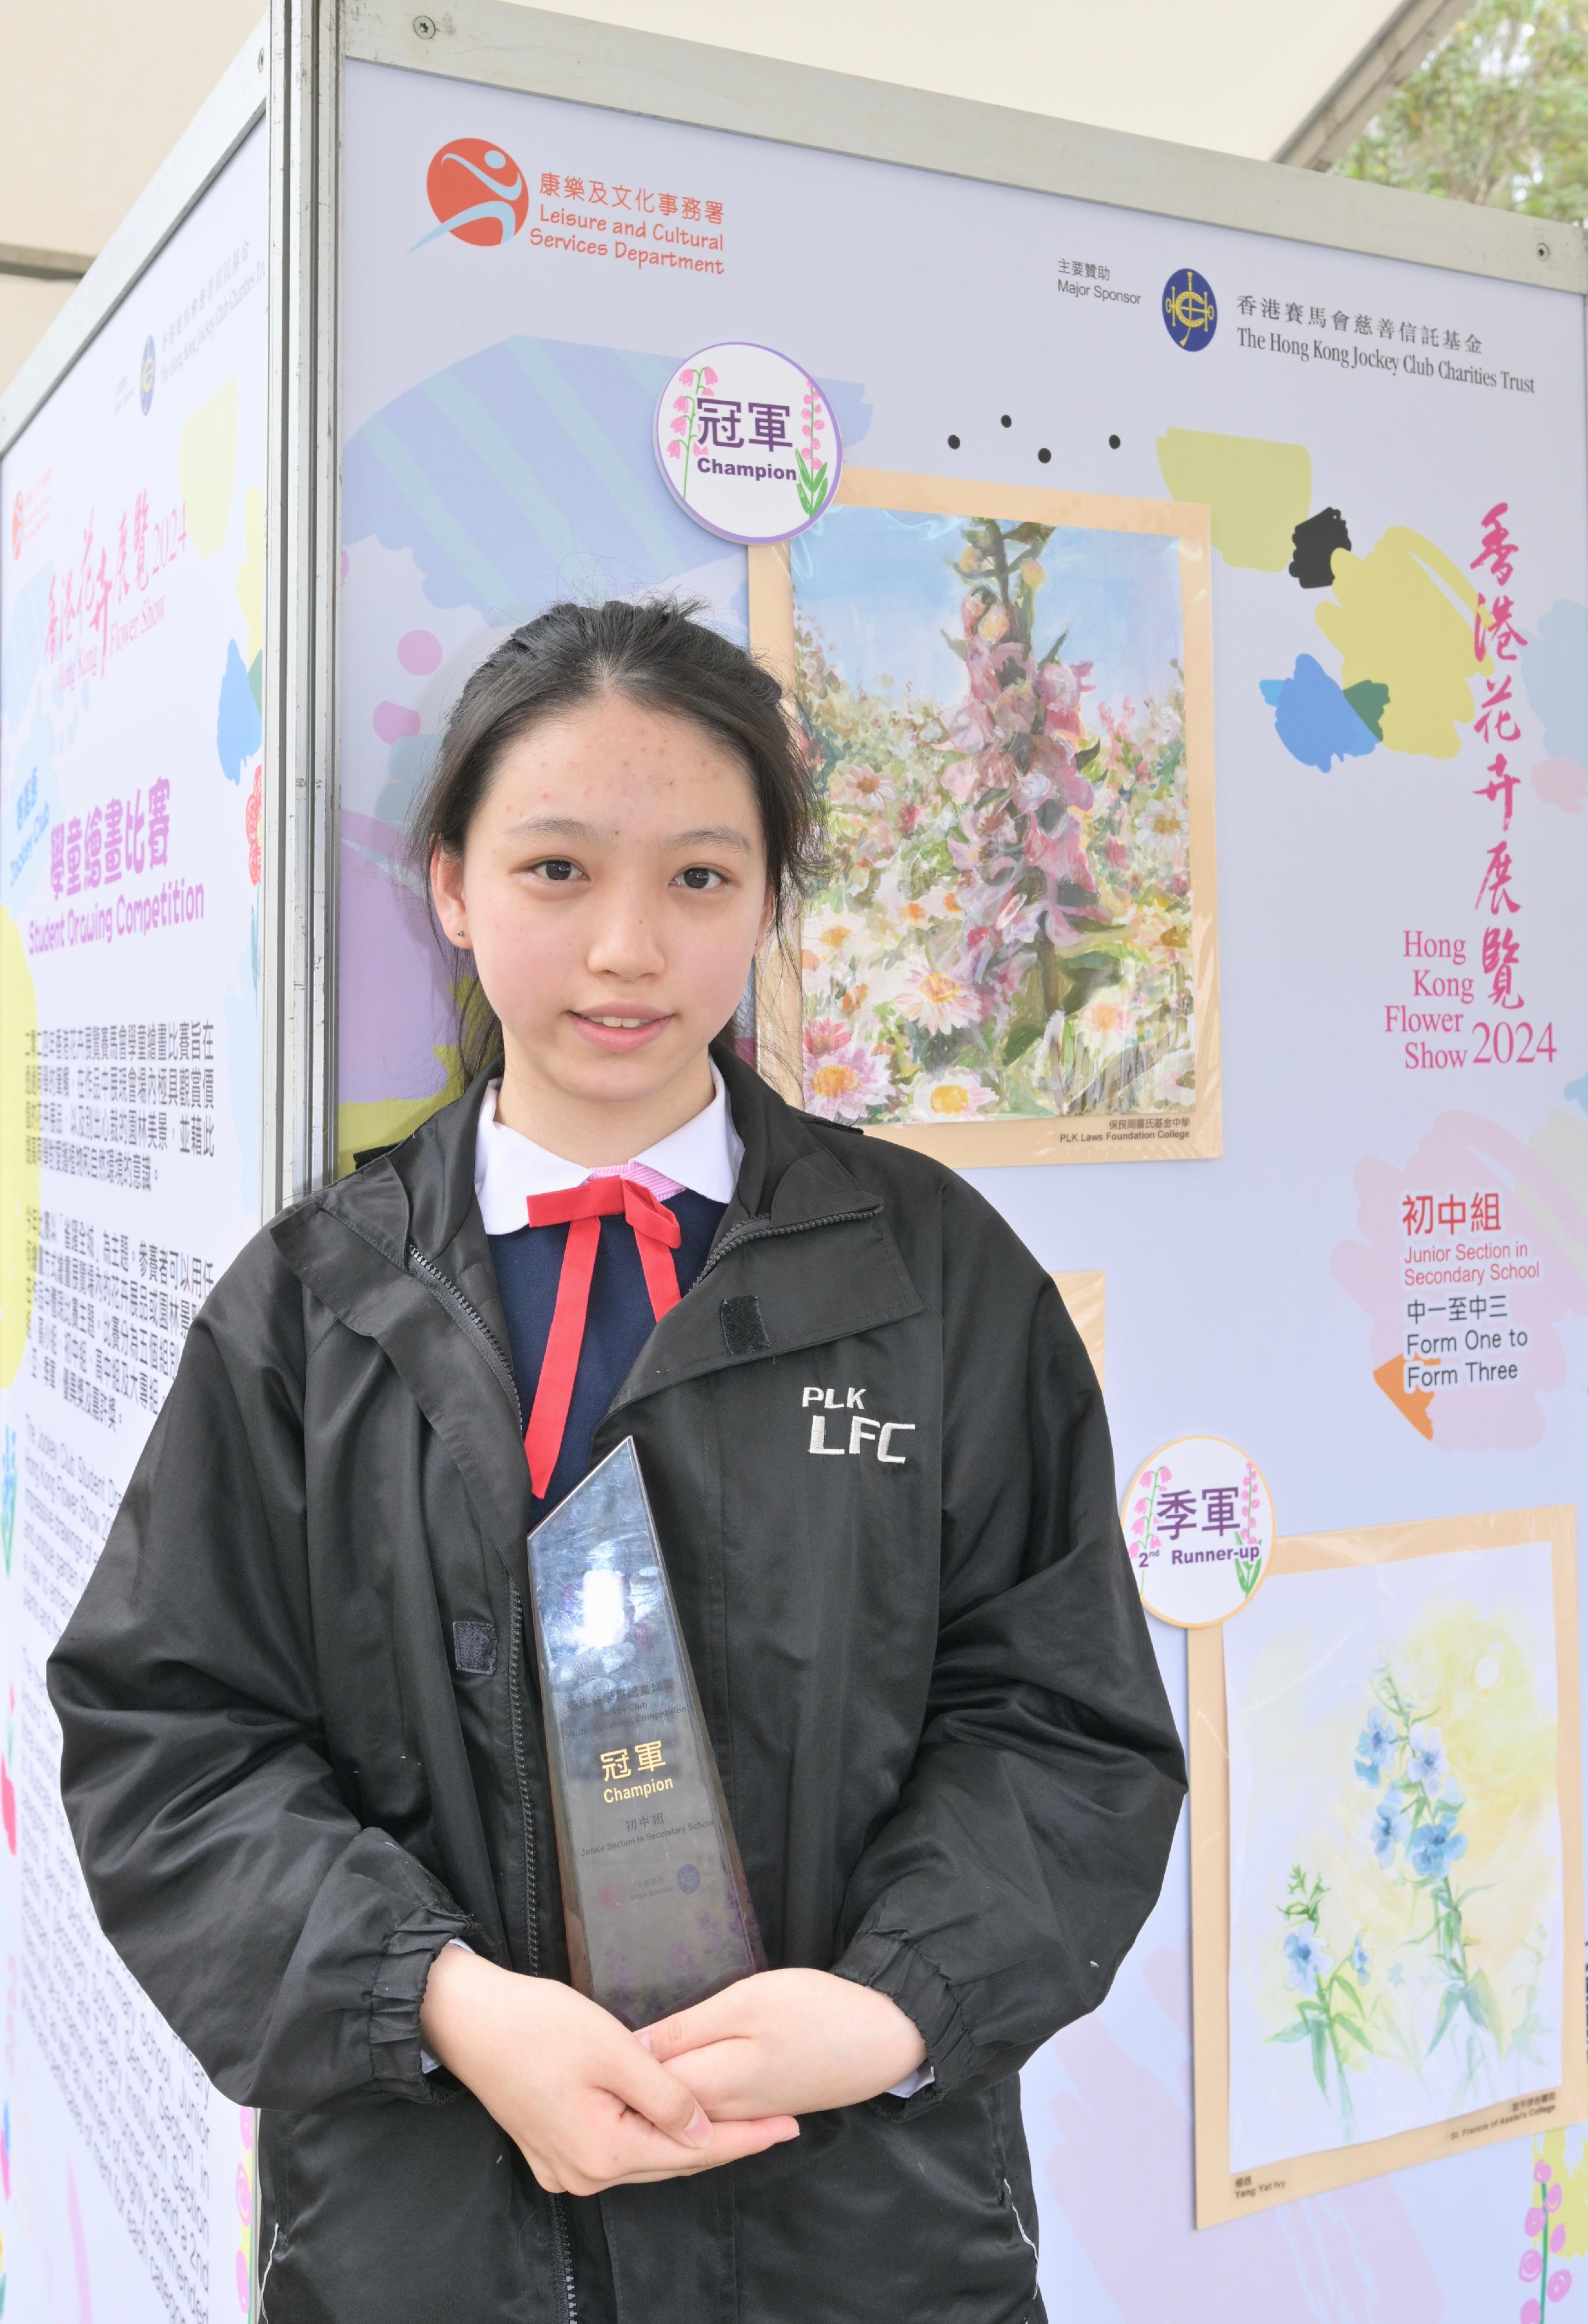 The Hong Kong Flower Show at Victoria Park will close at 9pm tomorrow (March 24). During the show period, various recreational fringe activities have been held, among which the Jockey Club Student Drawing Competition held its prize presentation ceremony today (March 23). Winning entries are now on display at the showground. Photo shows the champion of the Junior Section in Secondary School, Hui Nok, and her work.